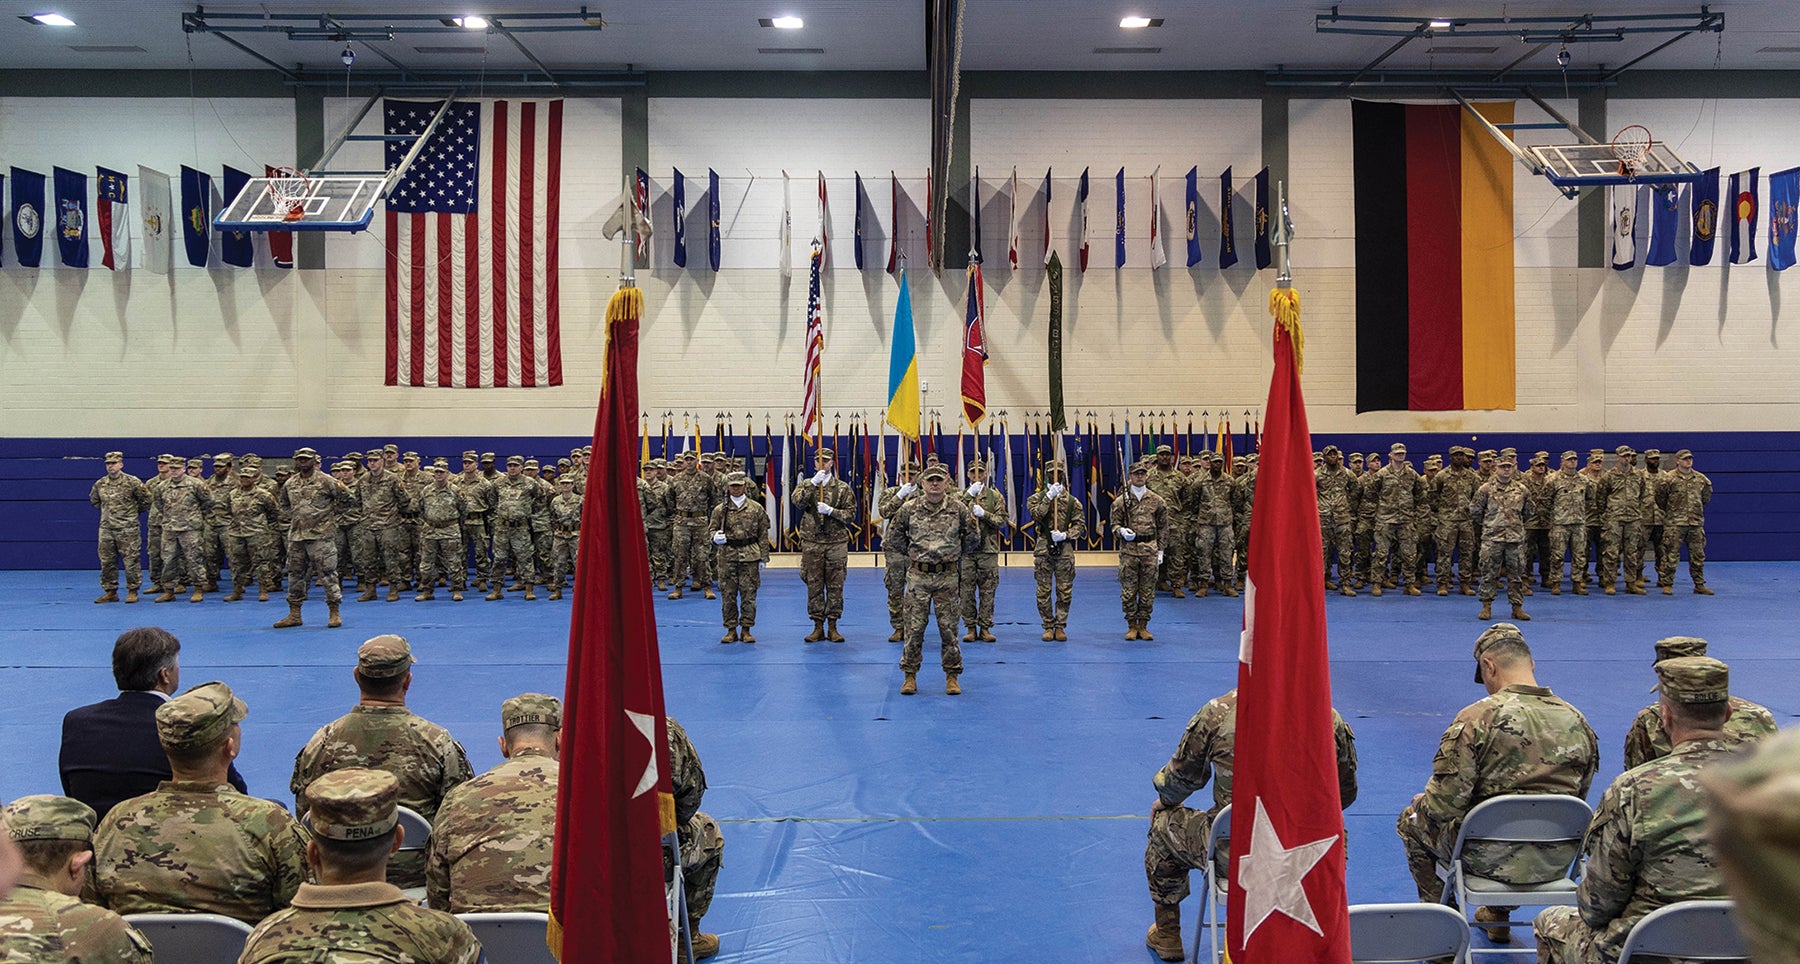 The Mississippi Army National Guard’s 155th Armored Brigade Combat Team takes over the Joint Multinational Training Group-Ukraine mission from the Arkansas Army National Guard’s 39th Infantry Brigade Combat Team during a ceremony in Grafenwoehr, Germany. (Credit: U.S. Army/2nd Lt. Jarvis Mace)